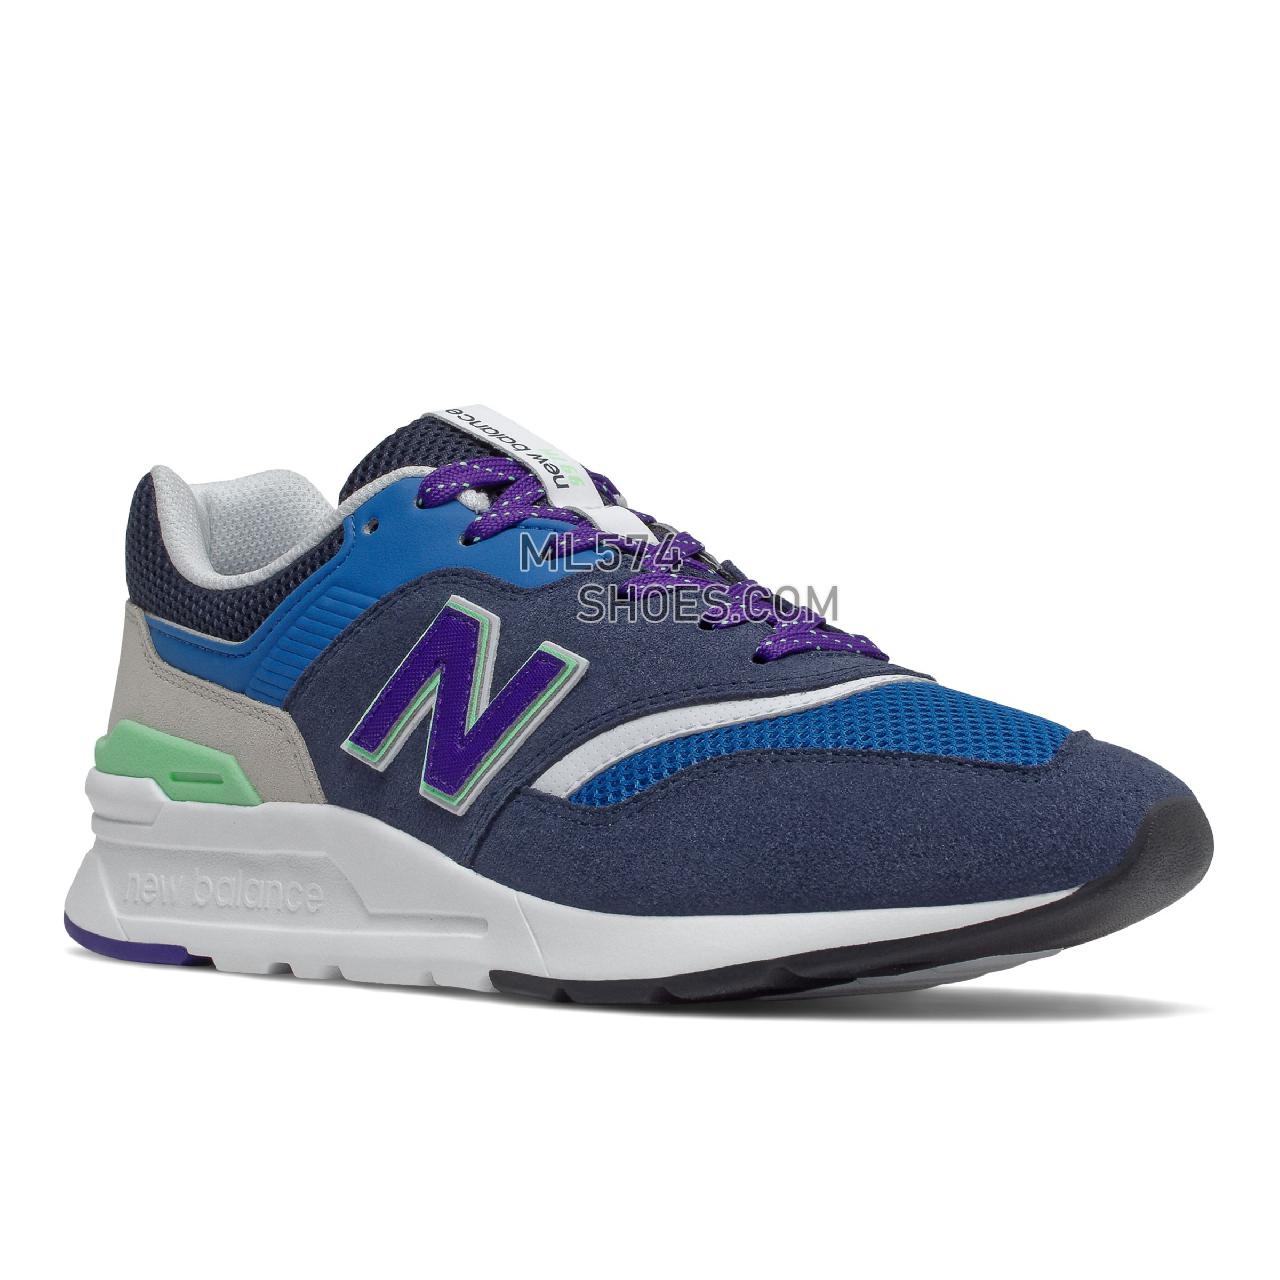 New Balance 997H - Men's Classic Sneakers - Laser Blue with Natural Indigo - CM997HPR